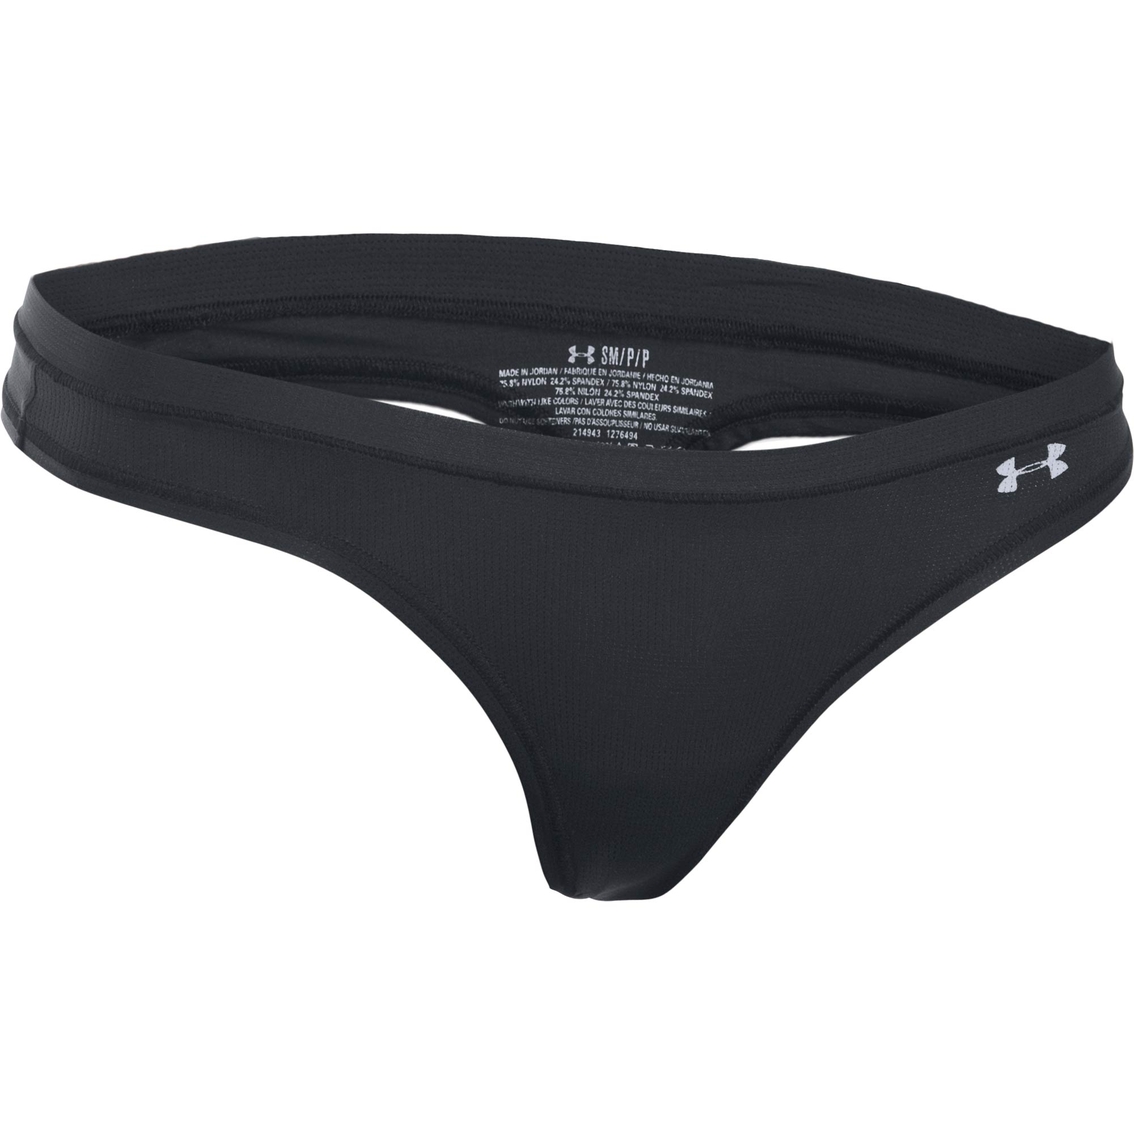 under armour women's pure stretch thong